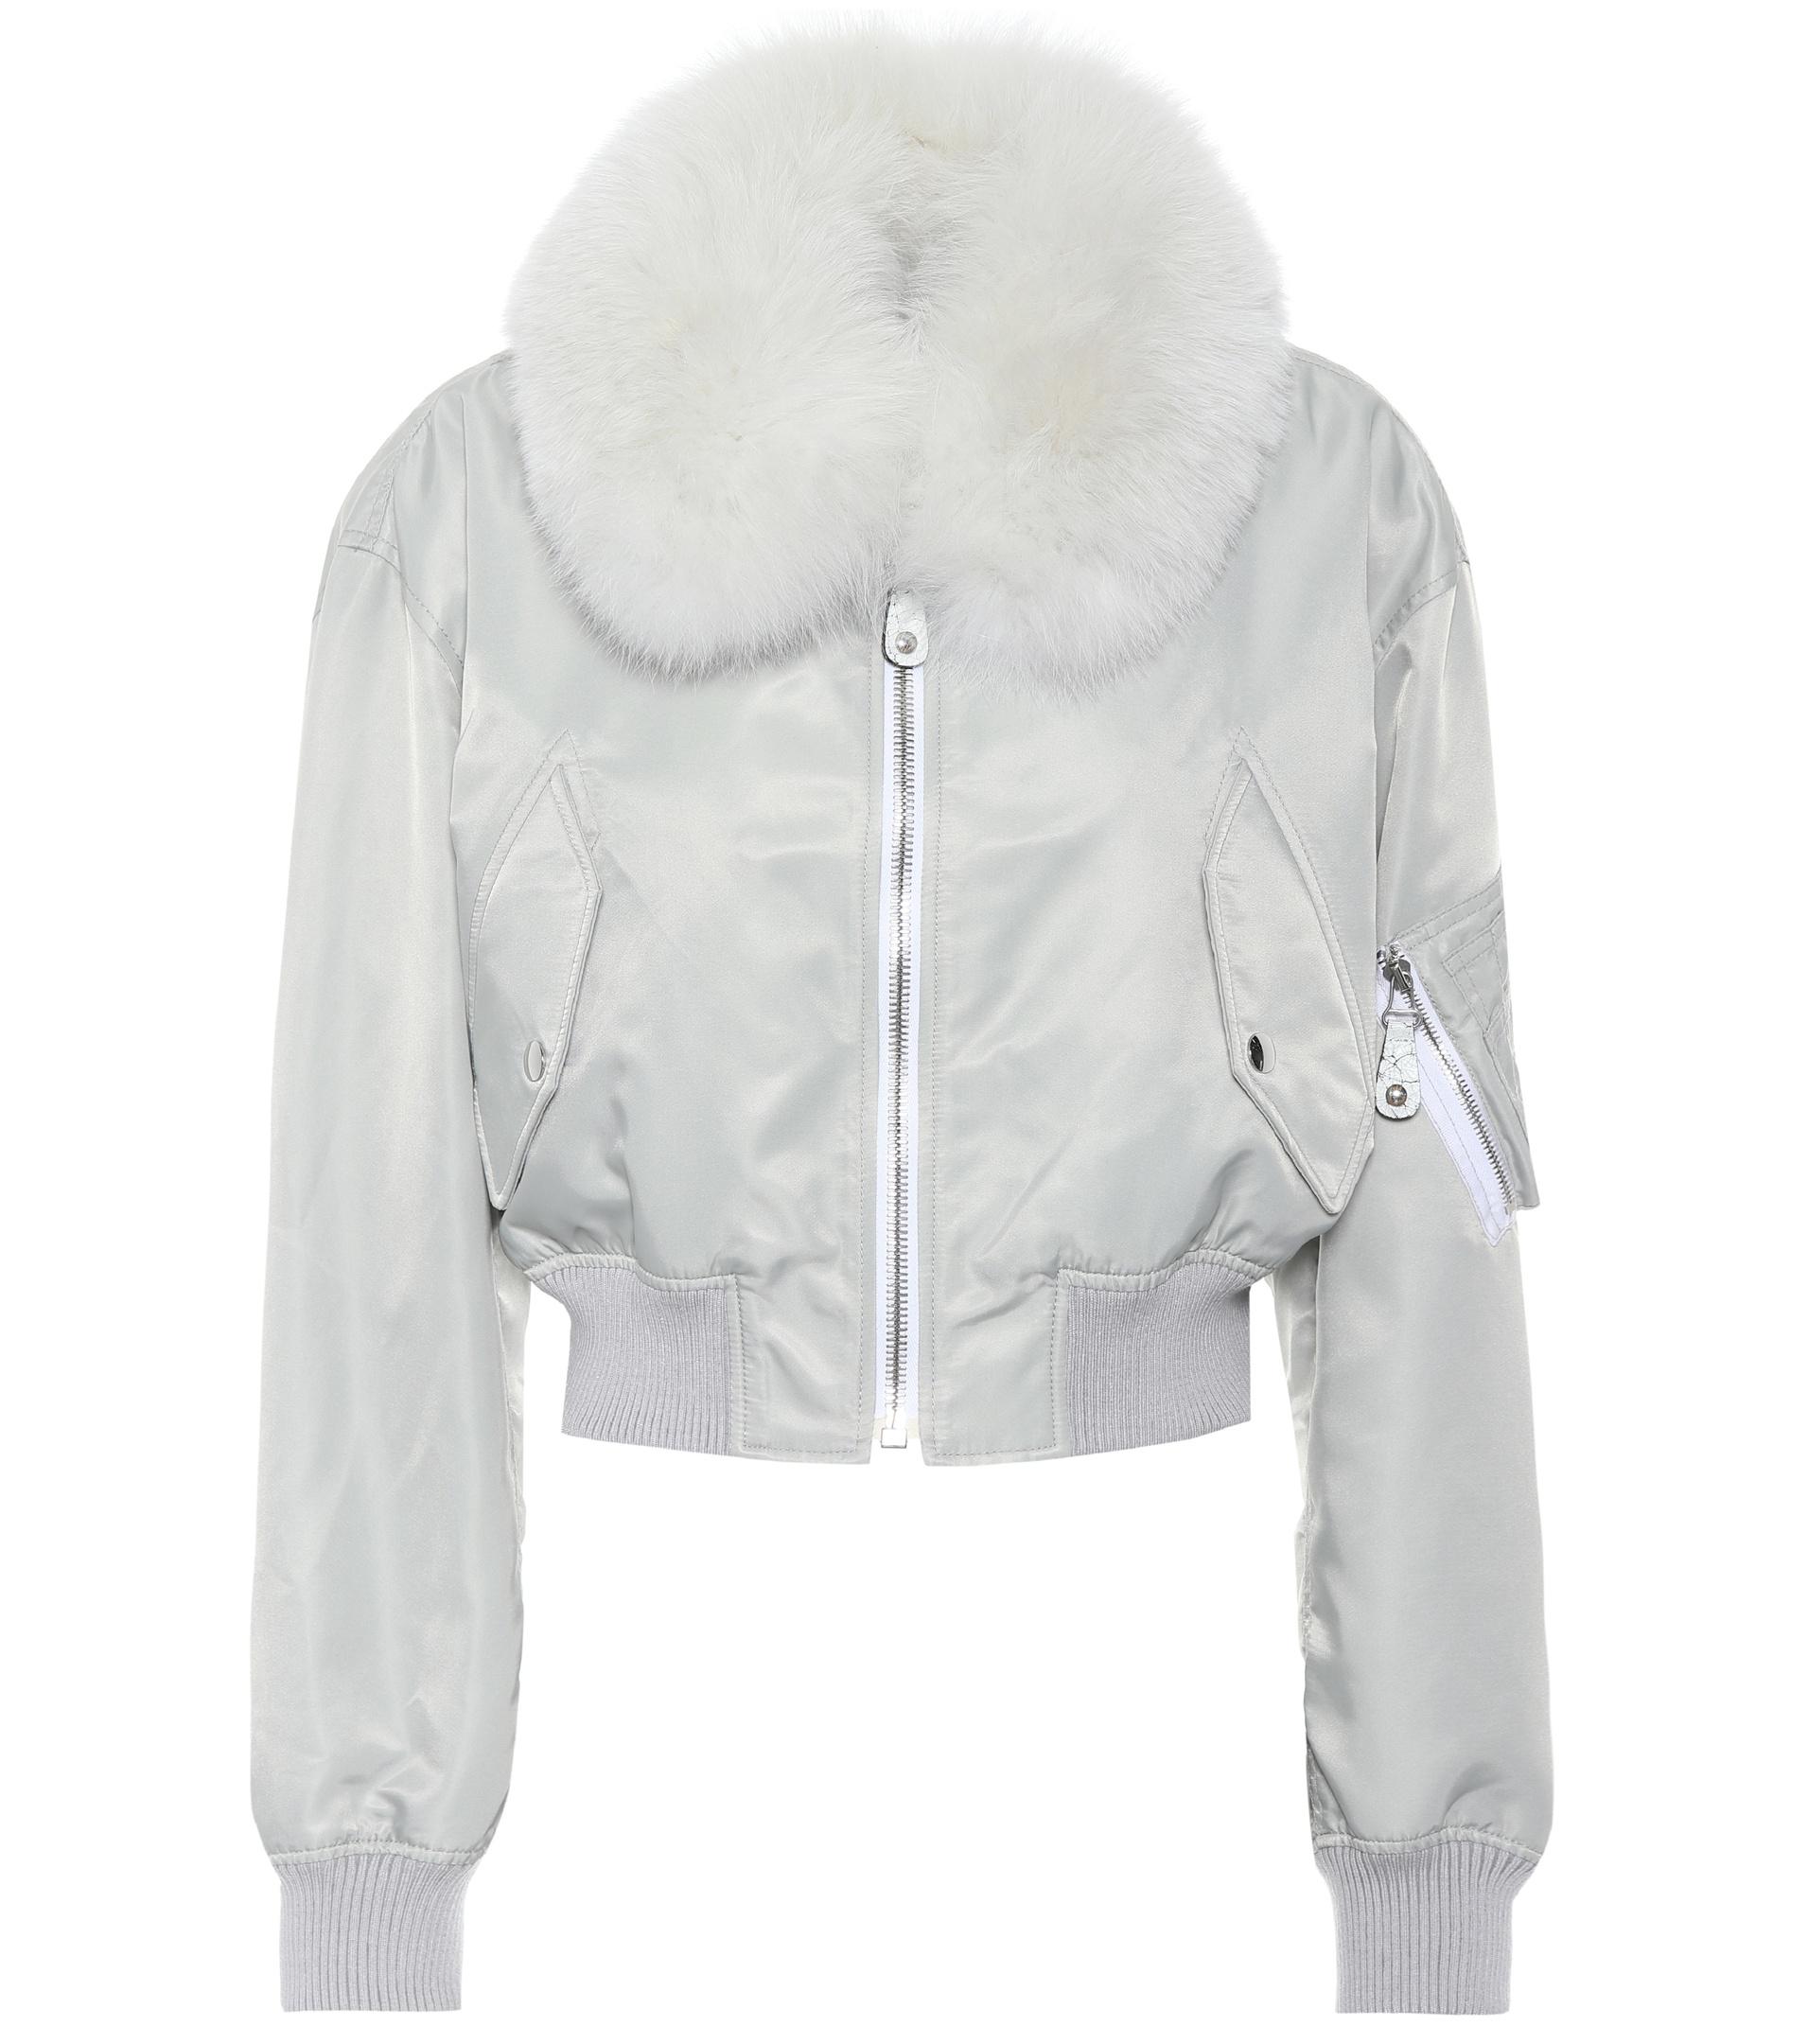 Lyst - Army By Yves Salomon Fur-lined Bomber Jacket in Green